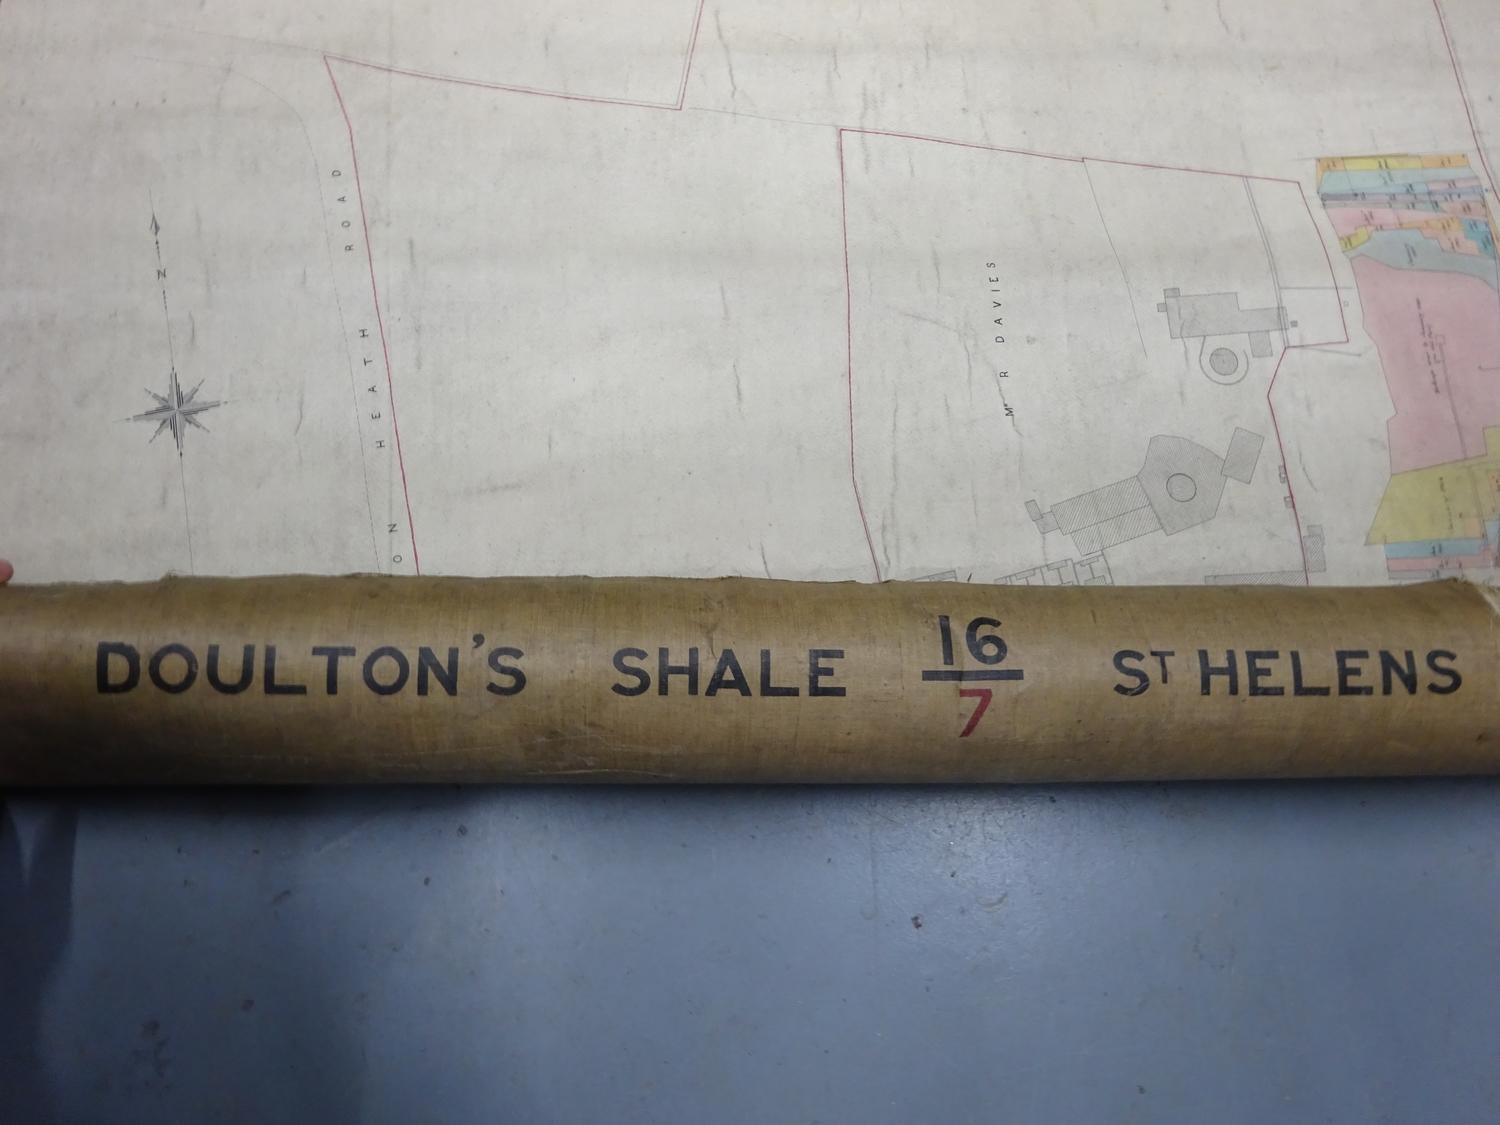 Map of St. Helens Doulton's Shale Mine at Sutton Heath - Image 4 of 4